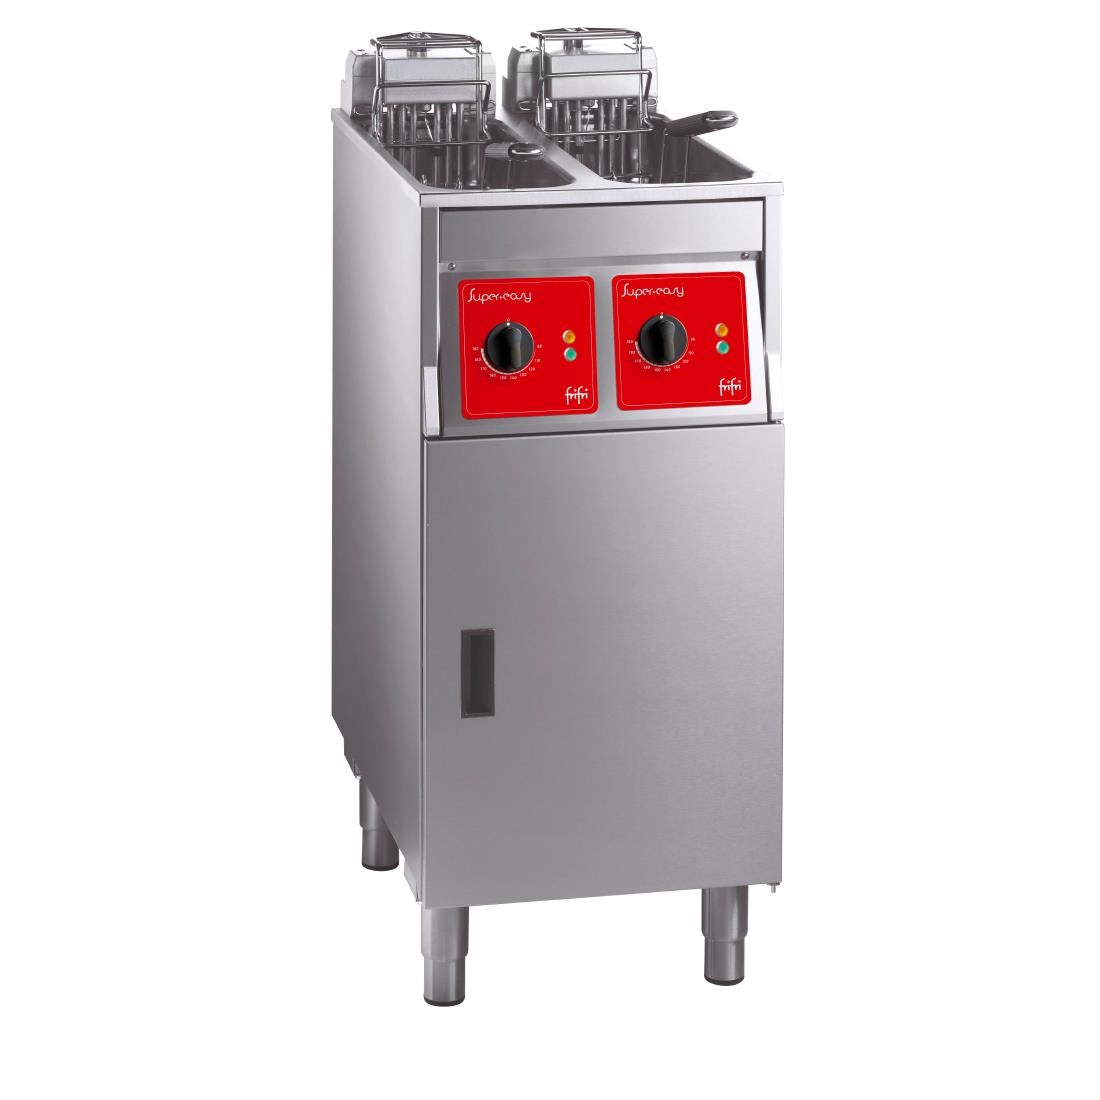 HS066-3PH FriFri Super Easy 422 Electric Free-Standing Twin Tank Fryer without Filtration 2 Baskets 2x 7.5kW - Three Phase